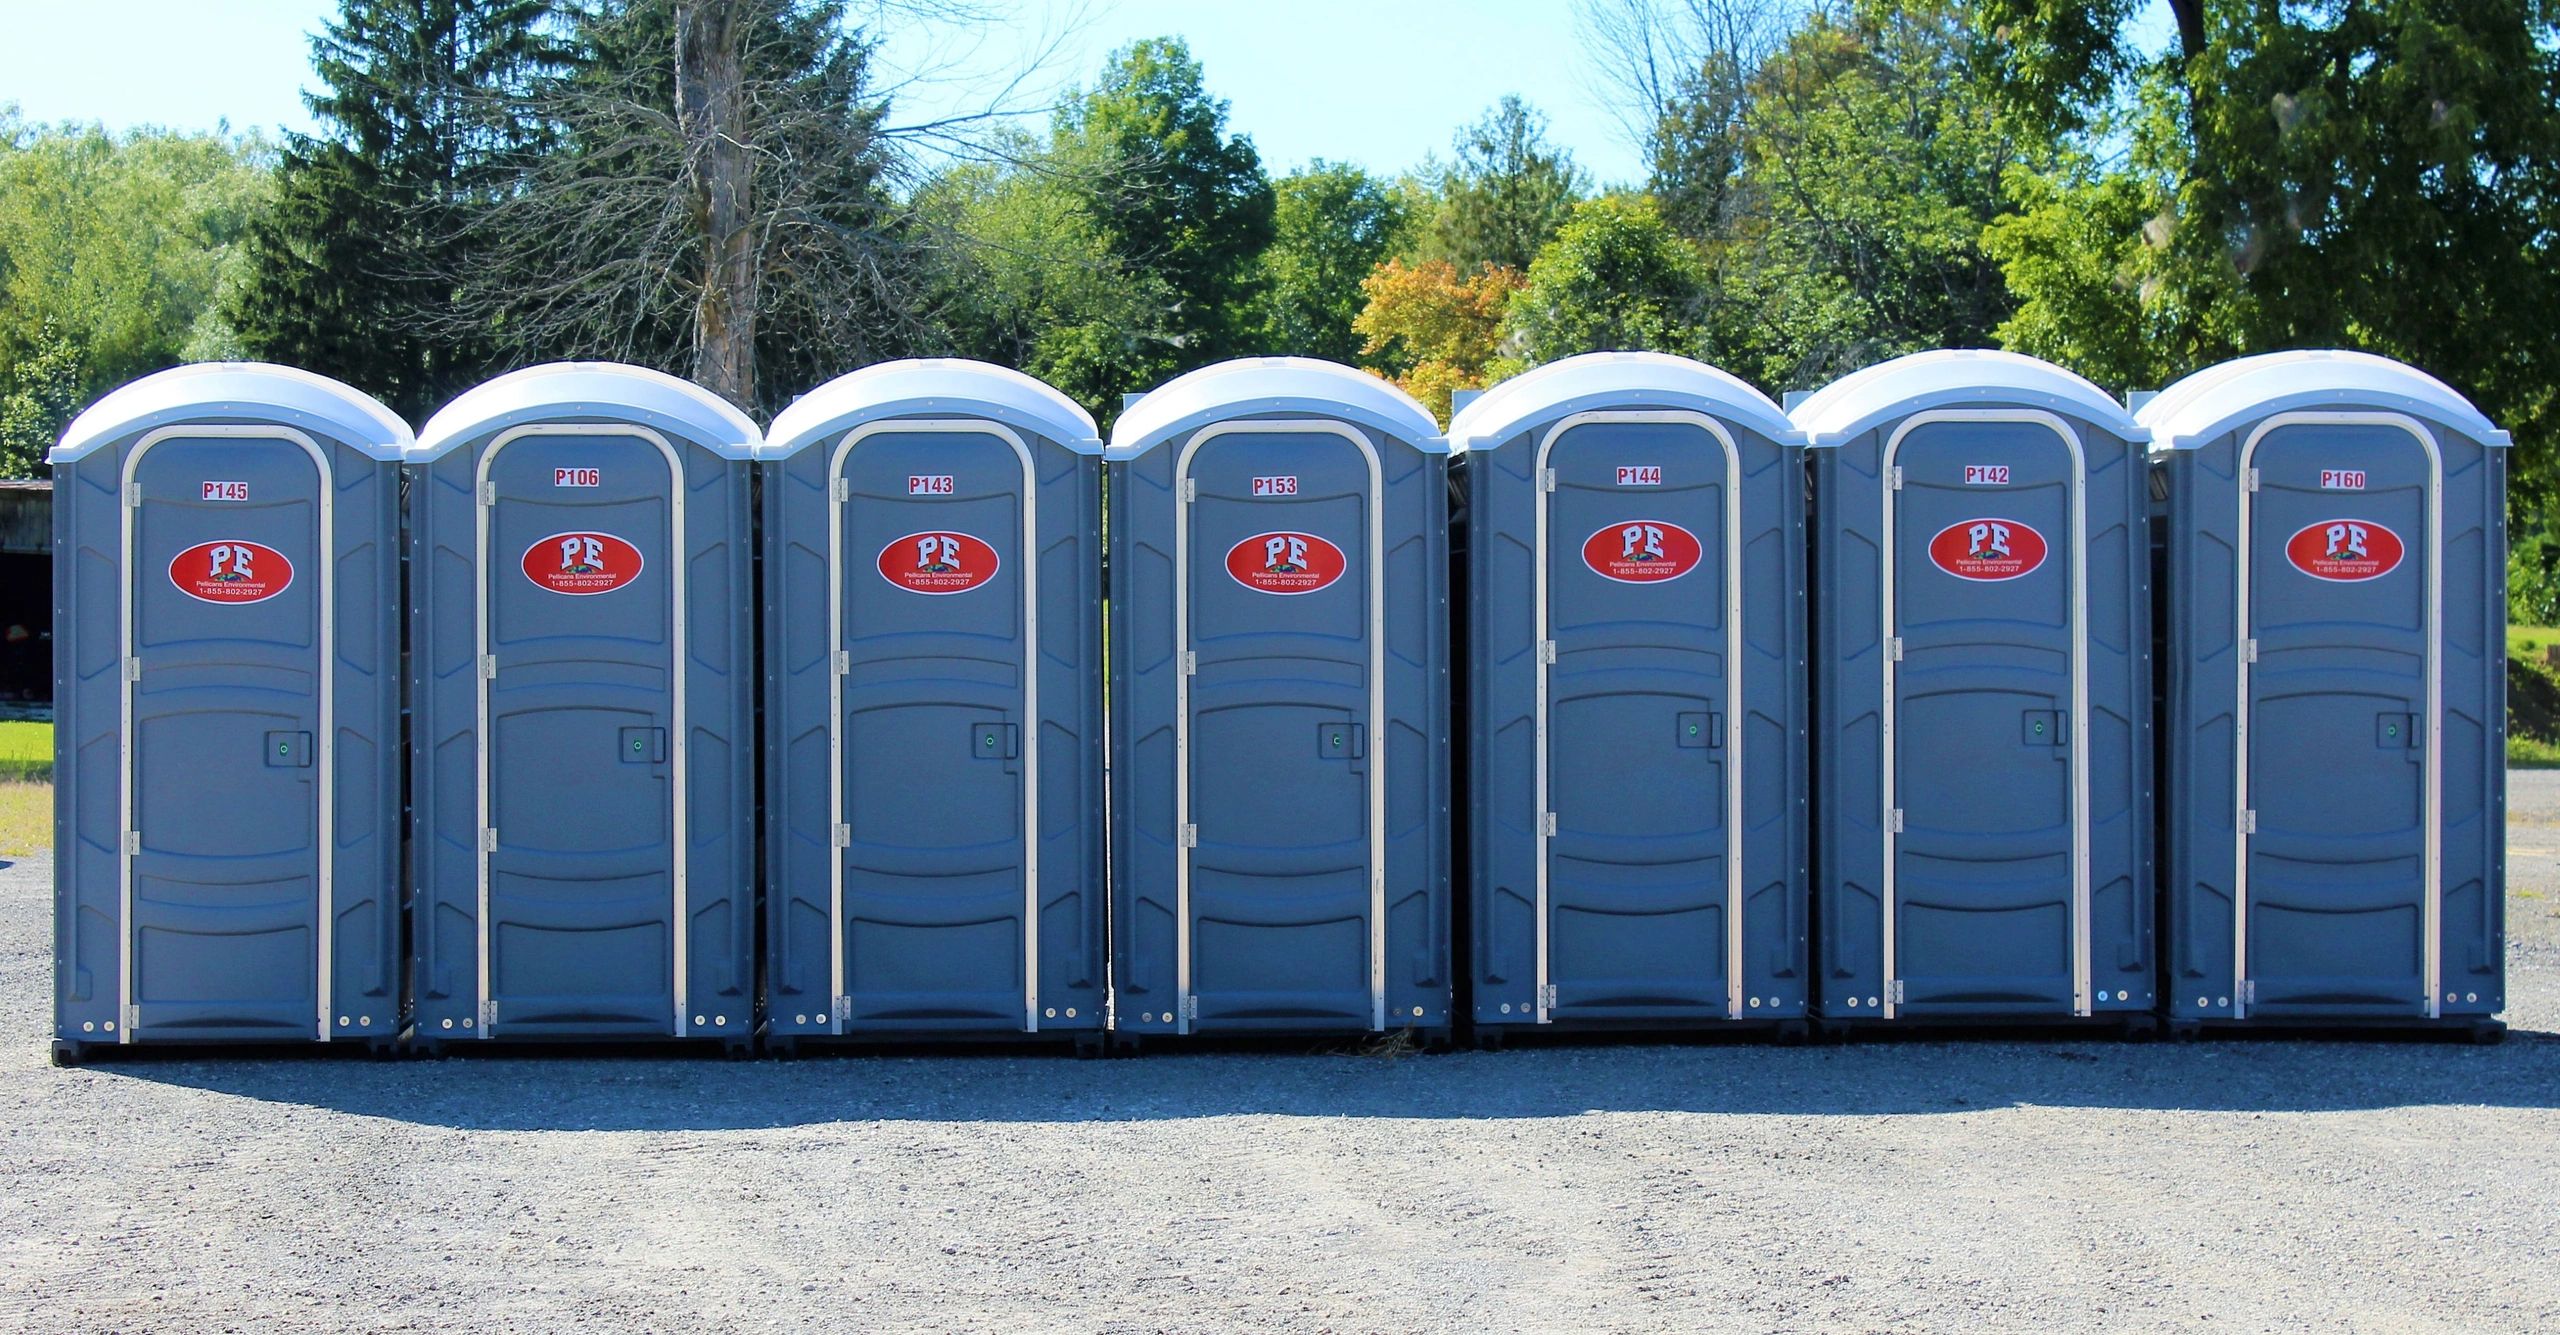 6000L Waste Tank - FORMIT PORTABLE TOILETS